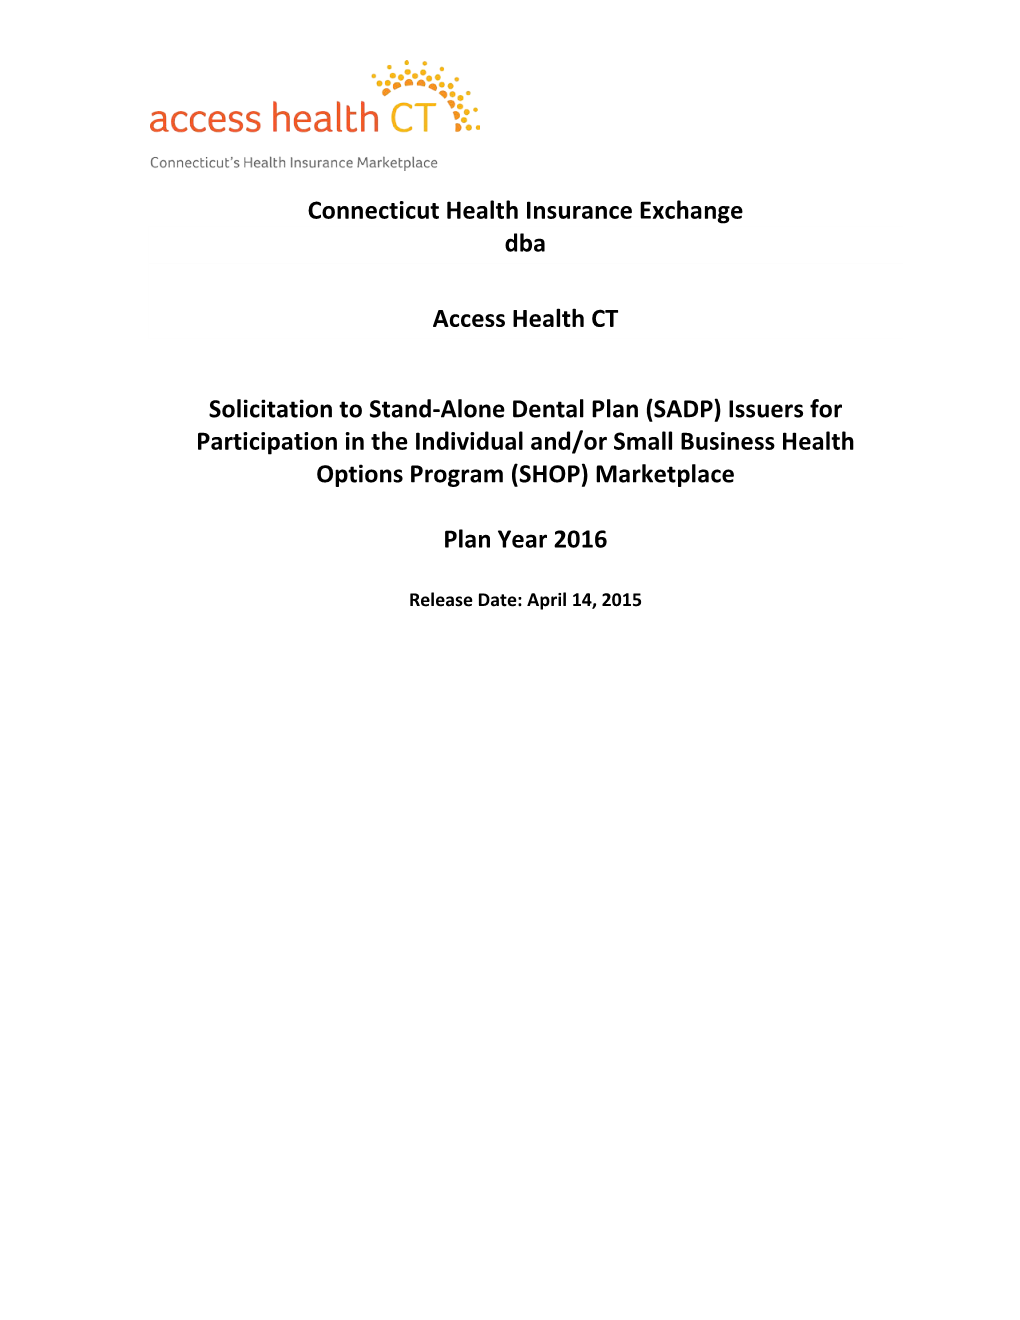 Connecticut Health Insurance Exchange Dba Access Health CT Solicitation to Stand-Alone Dental Plan (SADP) Issuers for Participat